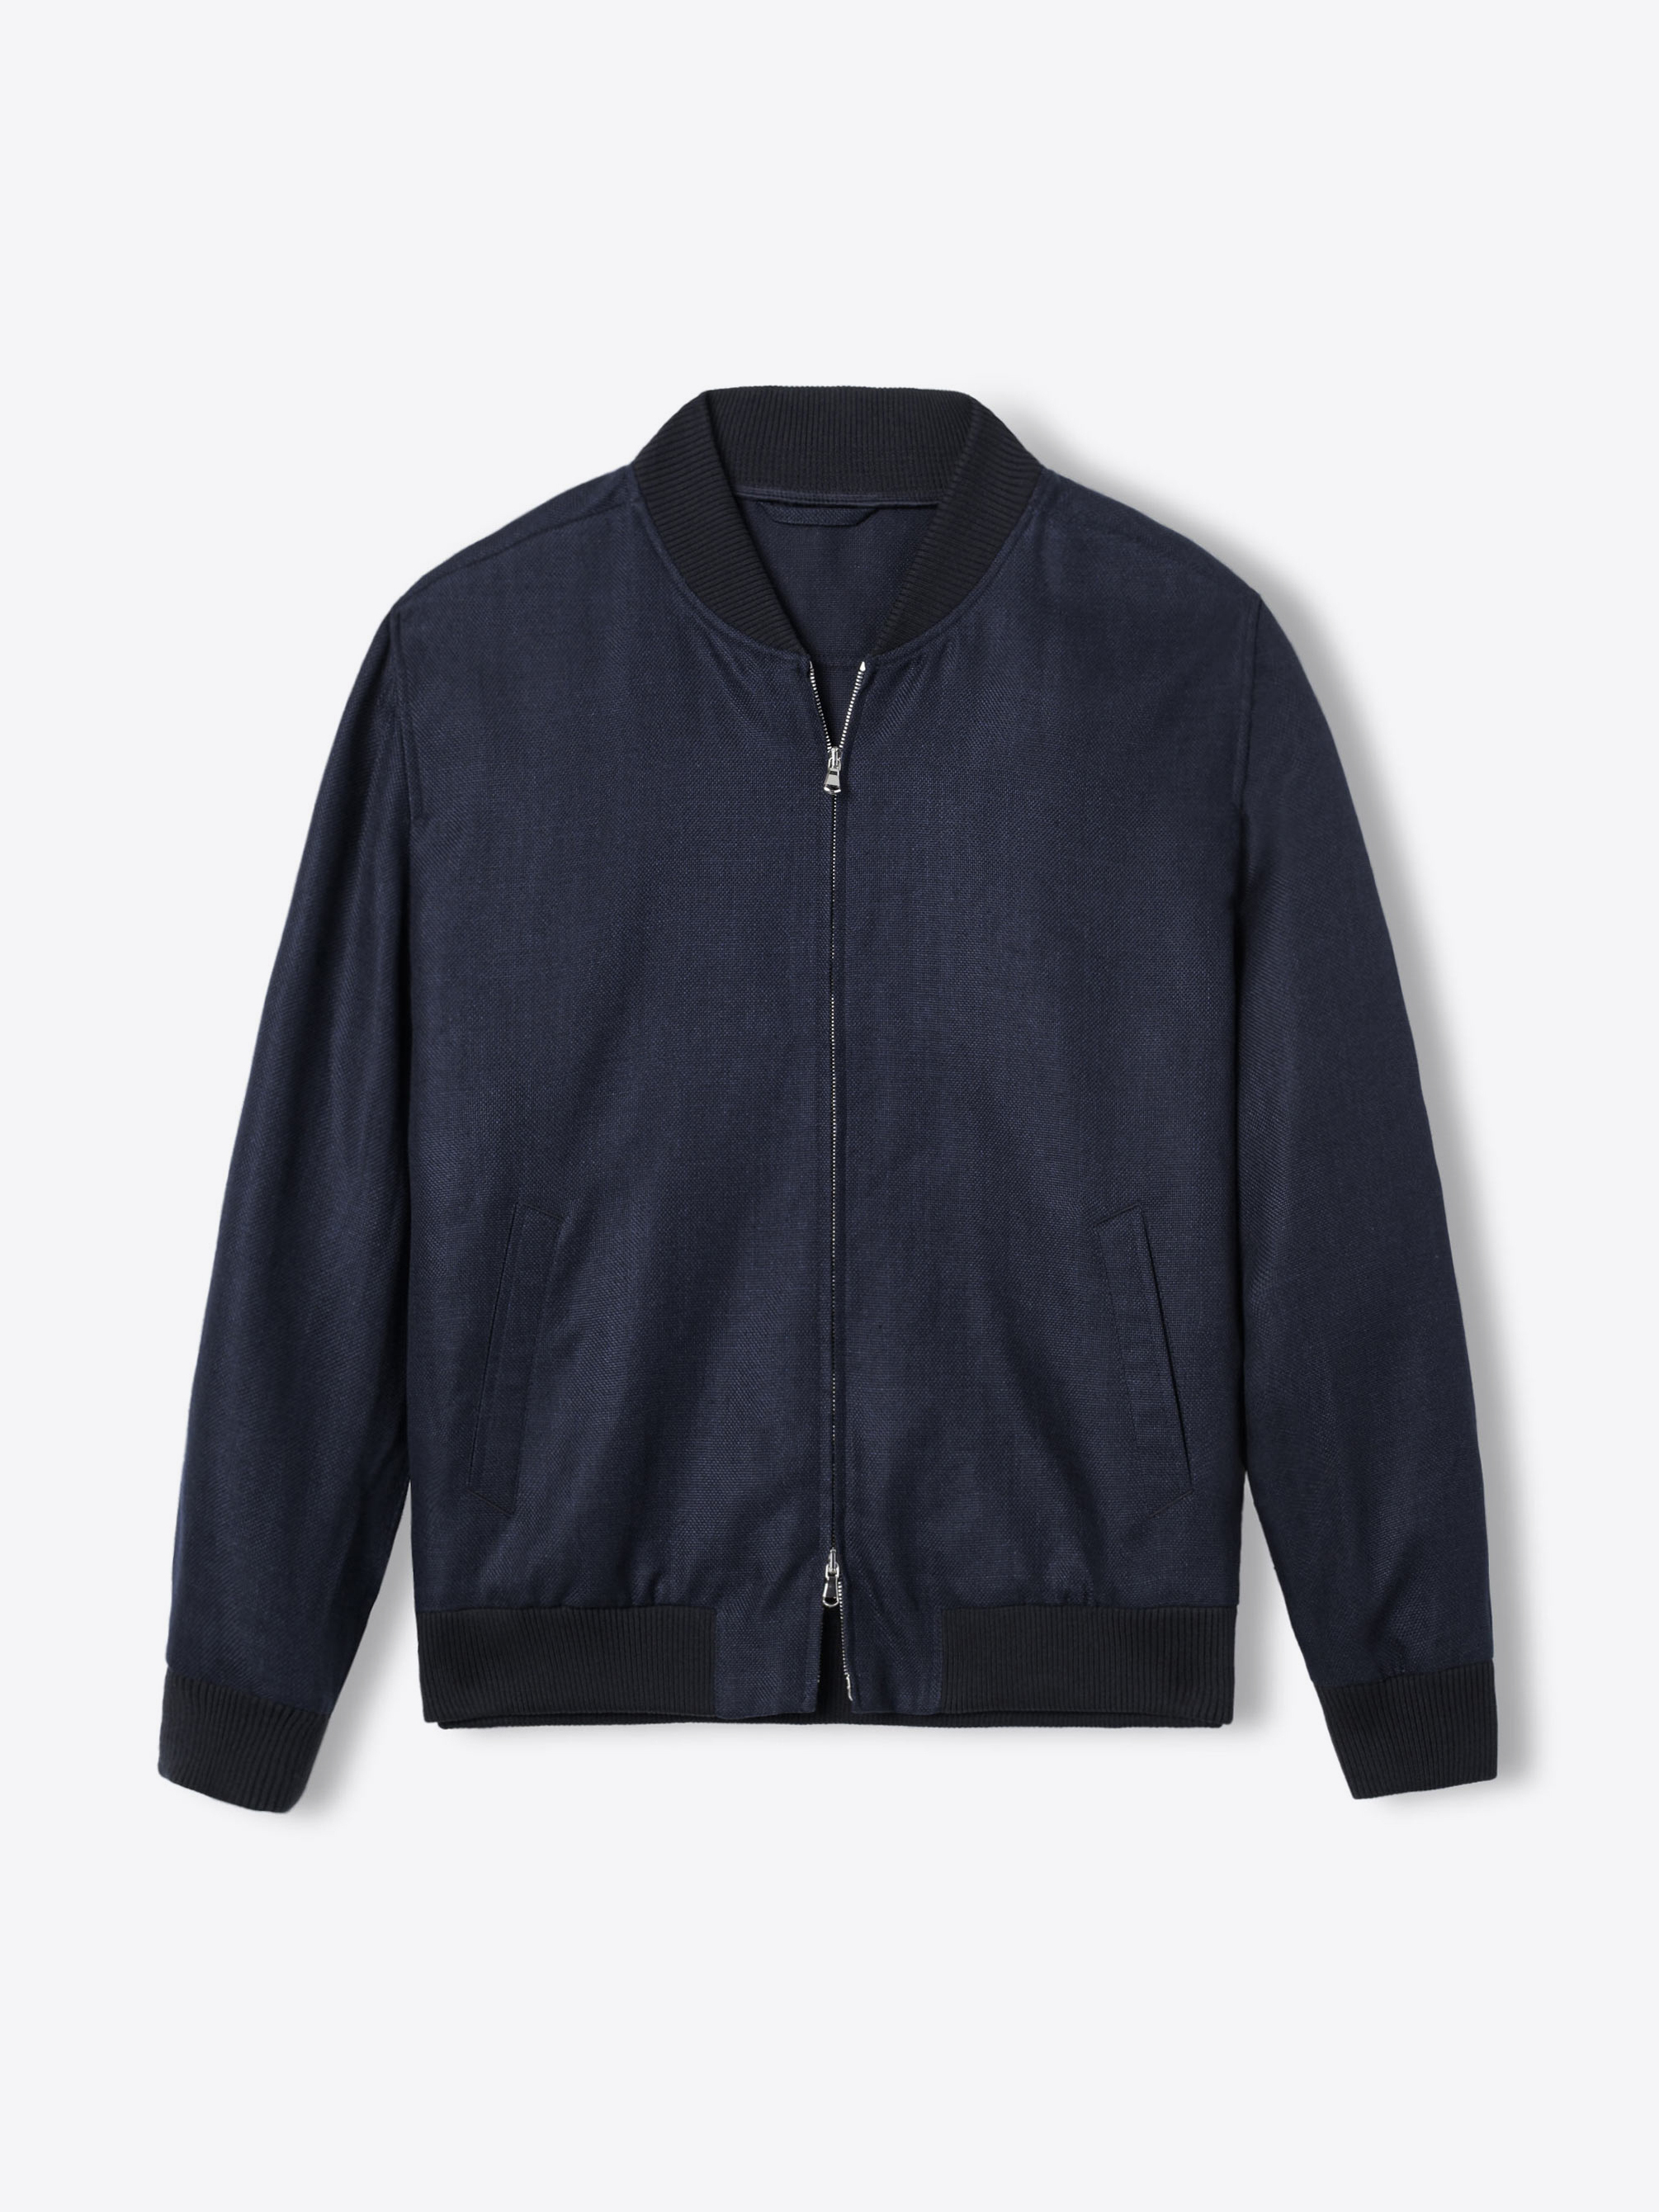 Wythe Navy Wool and Linen Unlined Bomber Jacket by Proper Cloth